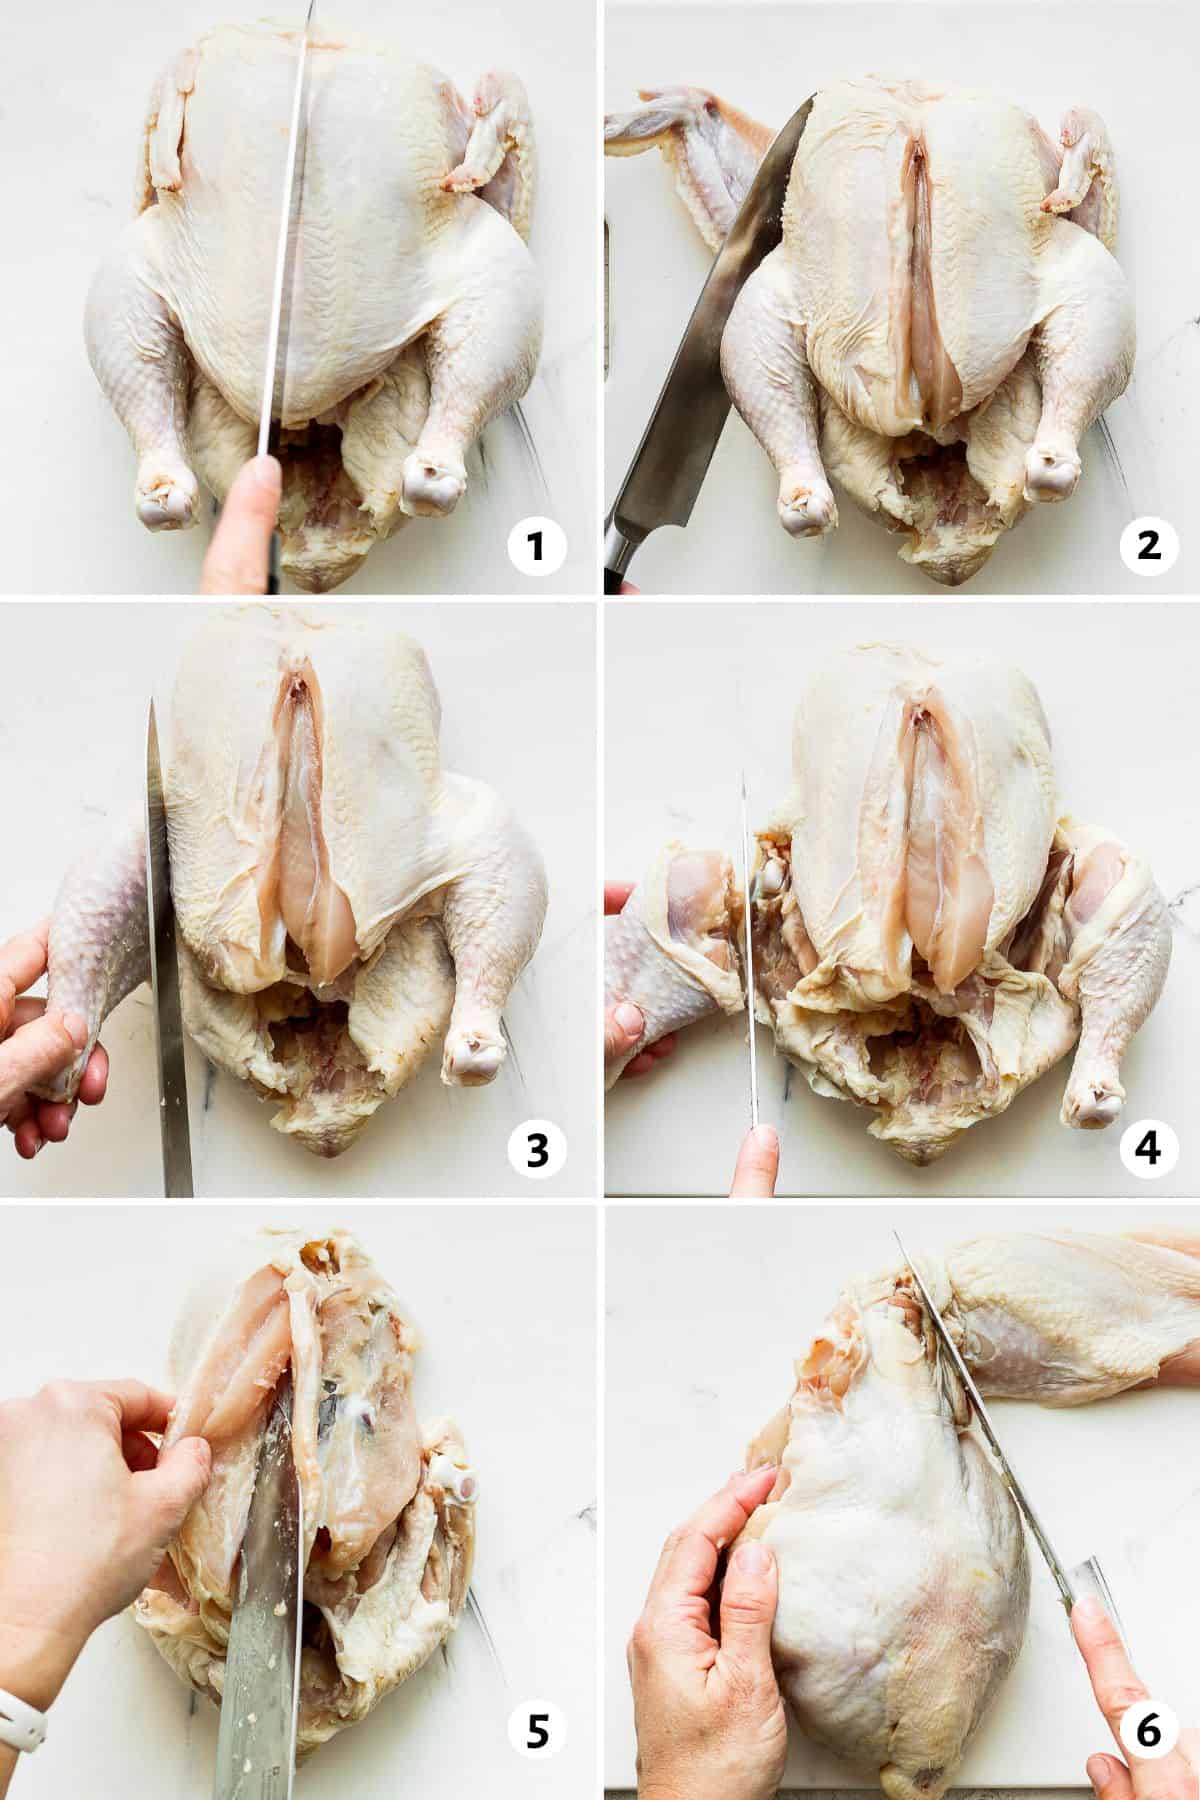 6 image collage on how to cut poultry by running knife down breast plate, cutting socket to remove wing, cutting along skin between drum and breast to separate legs, cutting at joints between things and drumsticks to separate, cutting down at breast again, then flipping chicken and cutting off bones with knife.